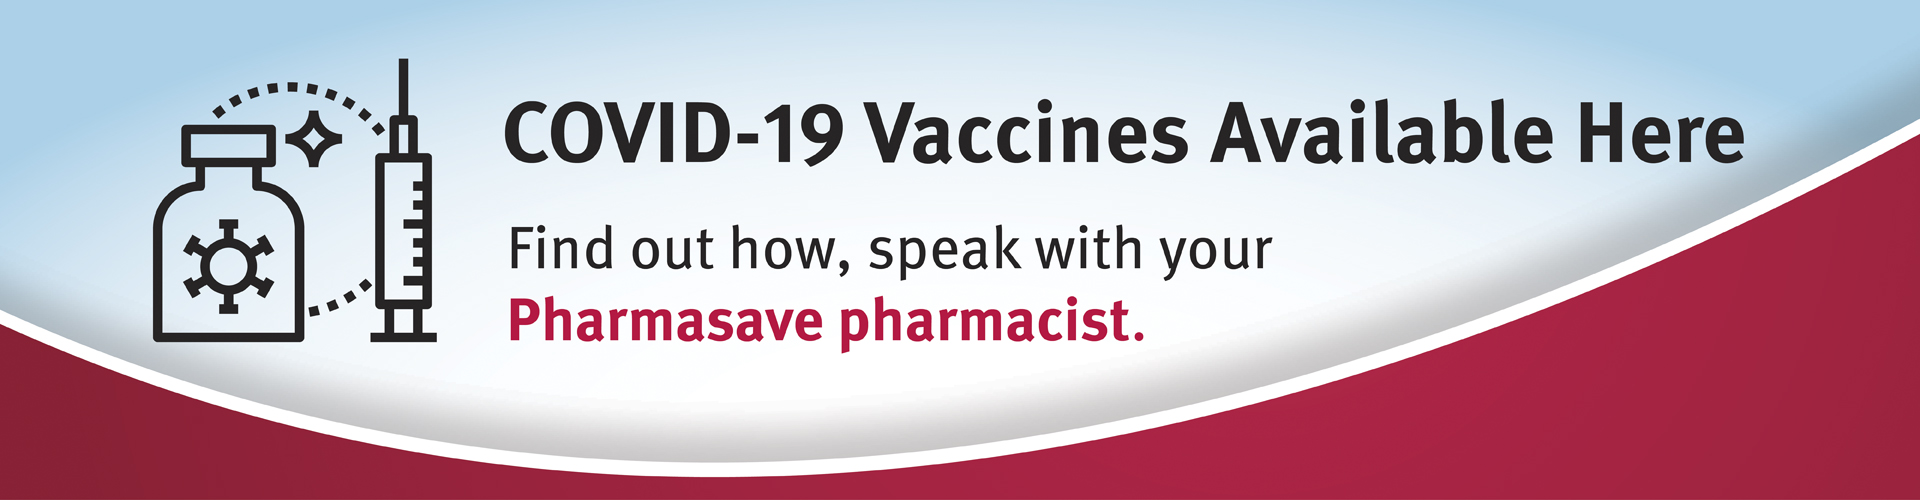 COVID-19 Vaccines Available Here